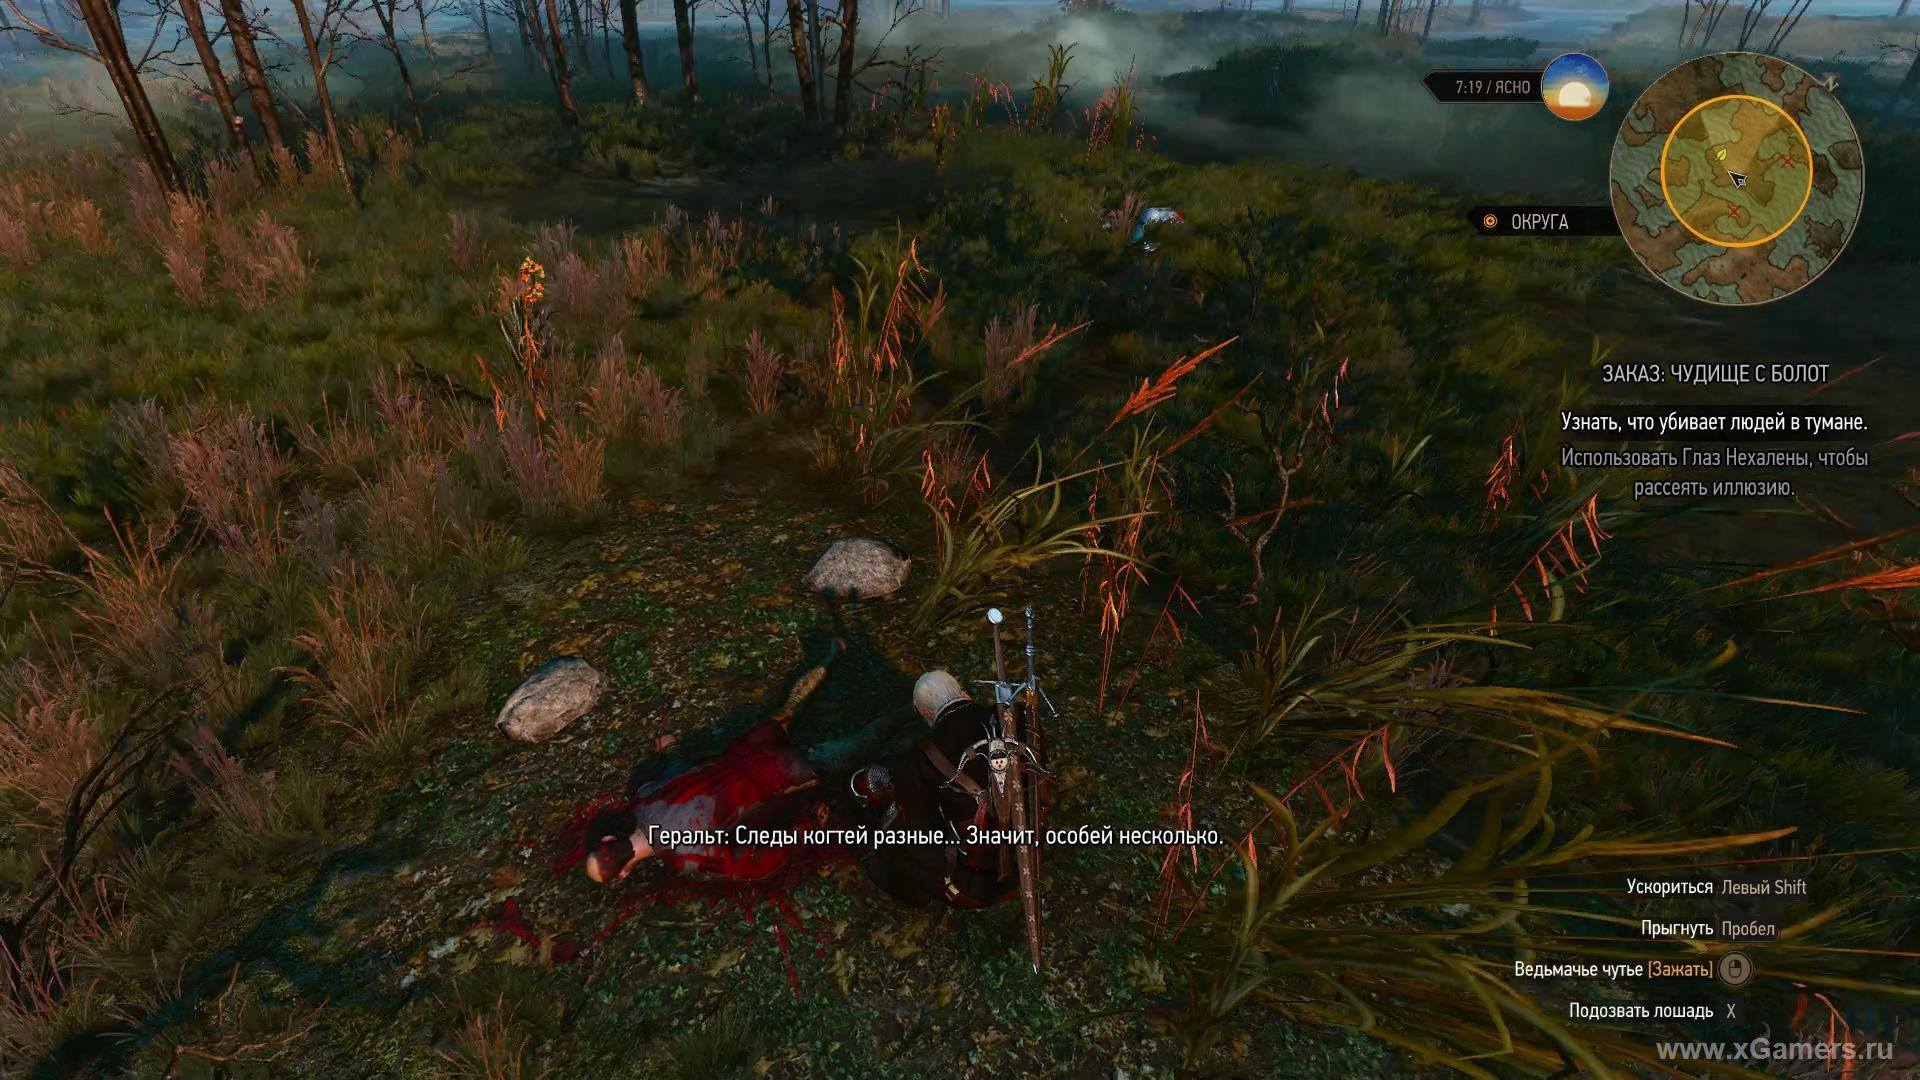 Mission "Monster from the swamps" The Witcher 3